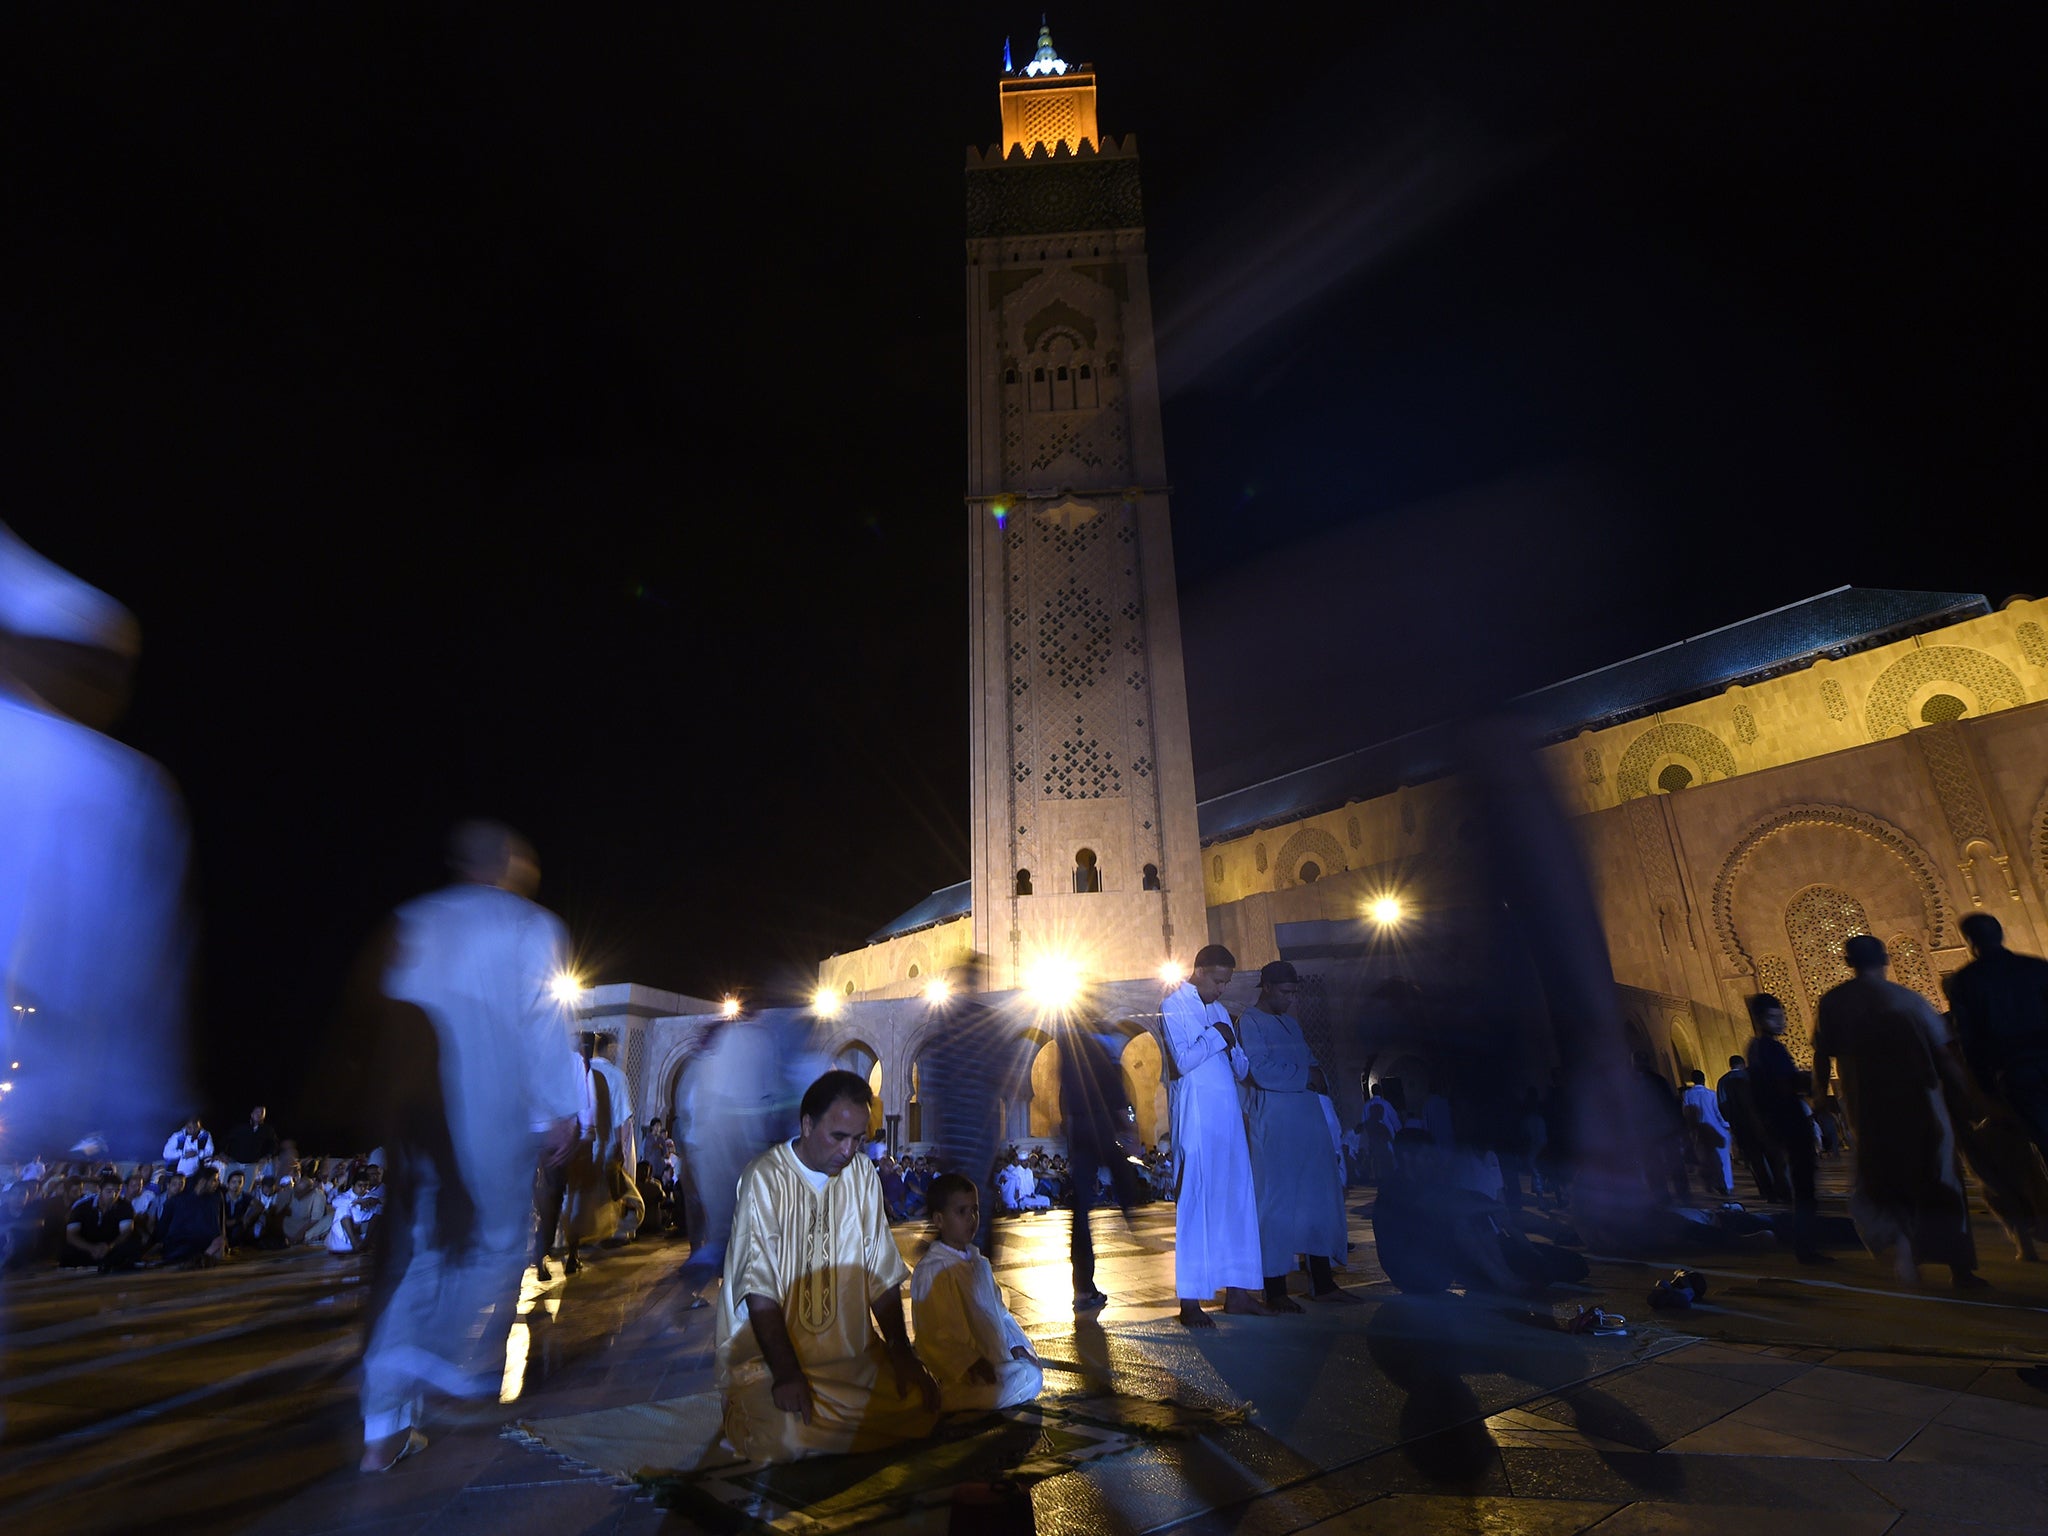 Muslims pray at Hassan II mosque in Morocco